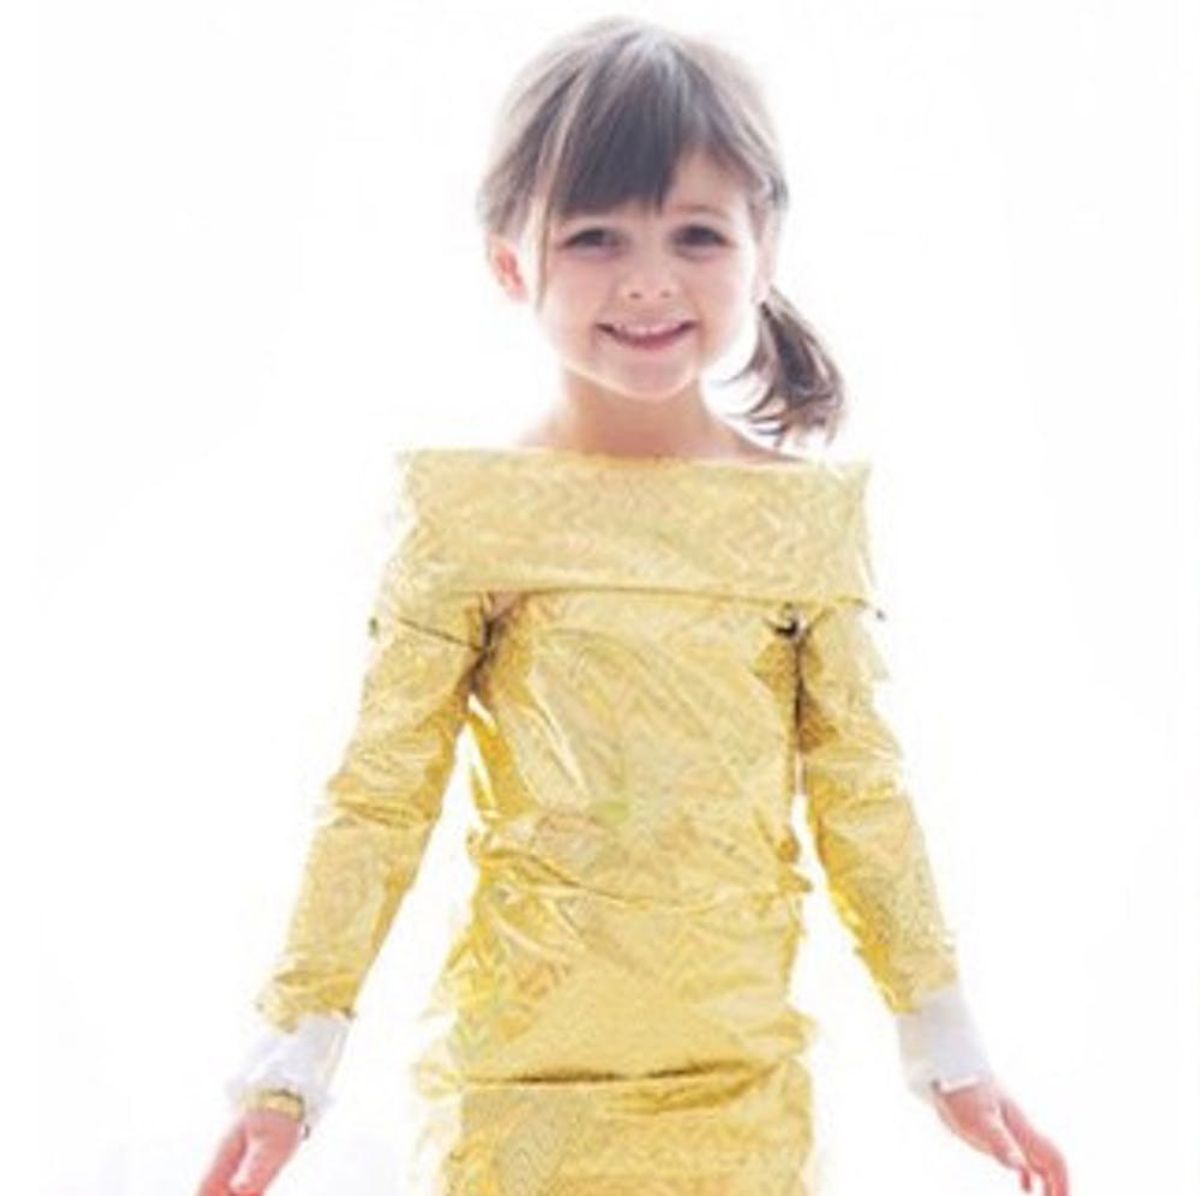 This 5-Year-Old Recreated the Best Oscars Looks With Paper